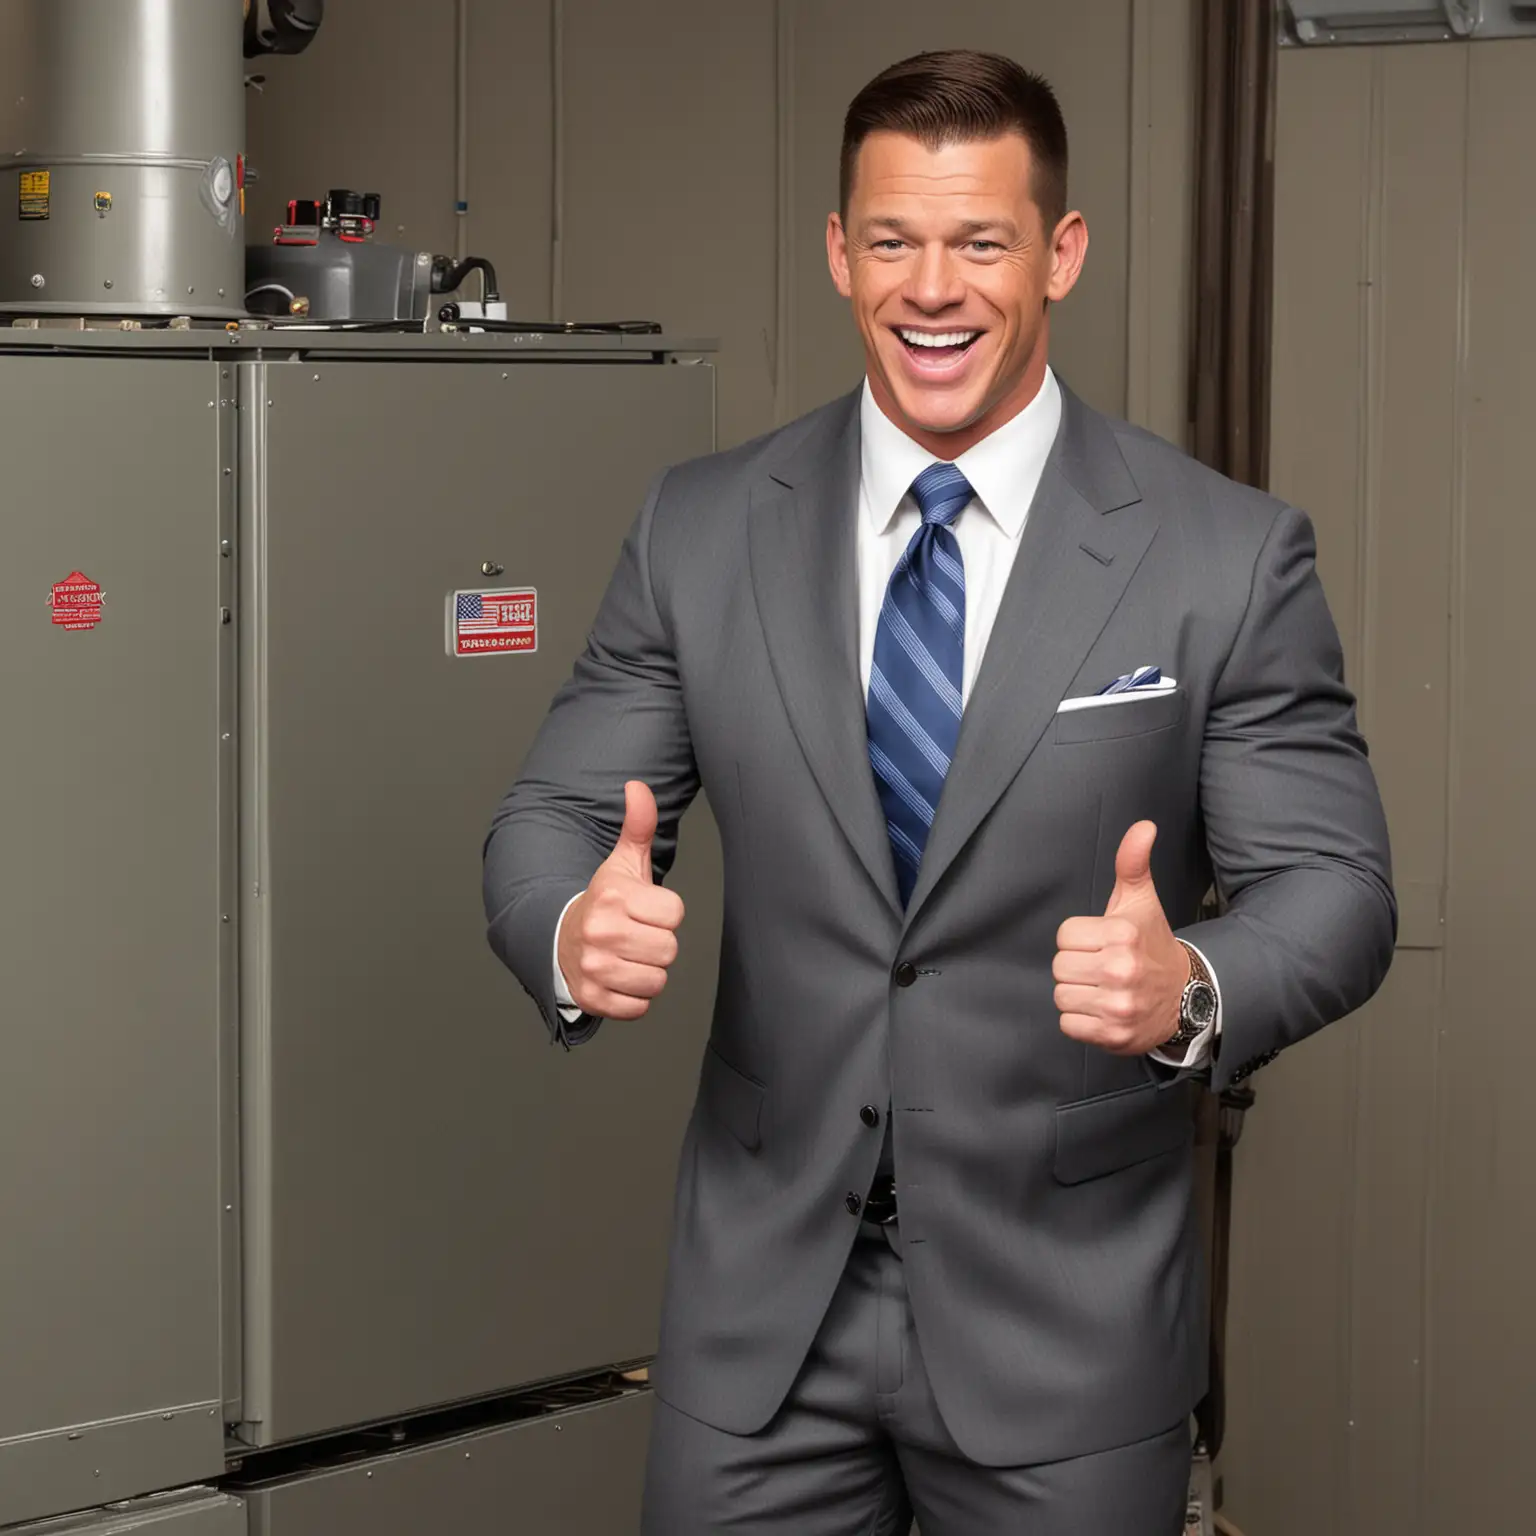 john cena, with an HVAC furnace, extremely happy, in a suit, thumbs up